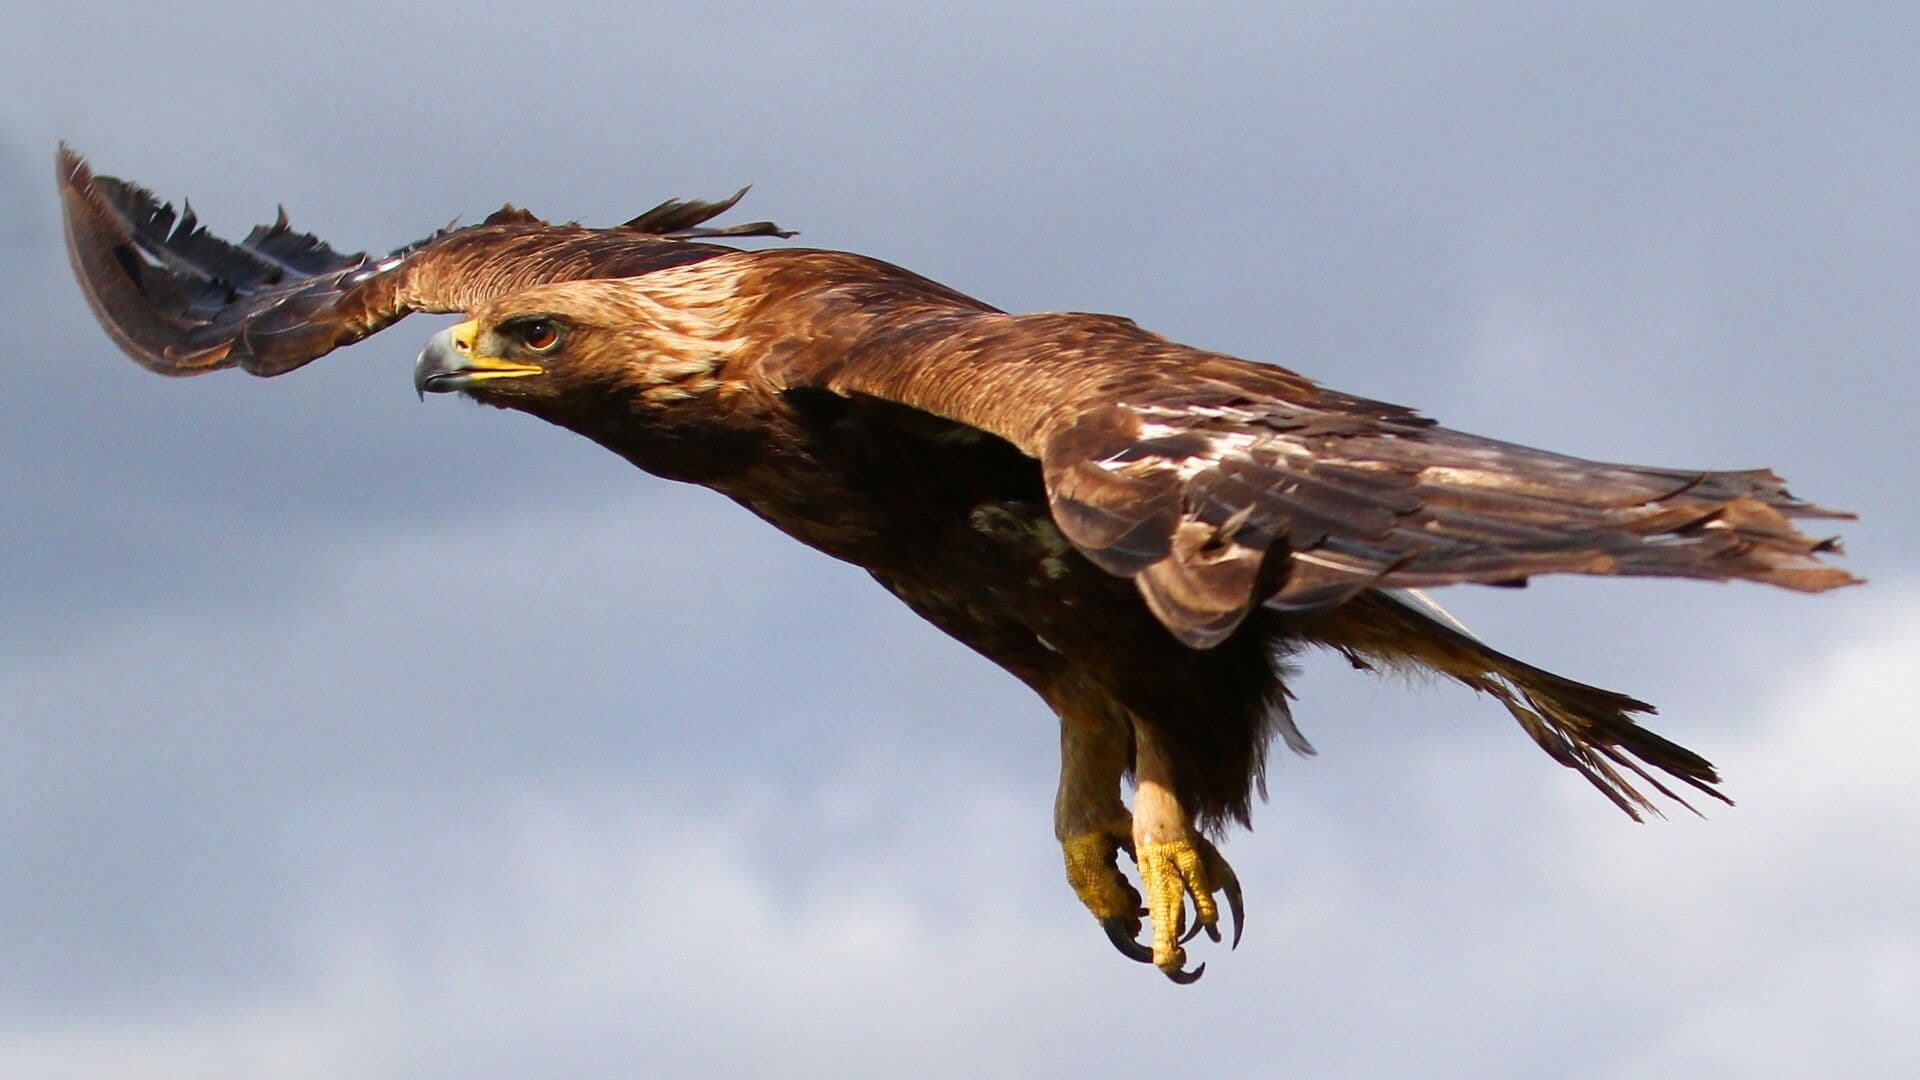 A view of an eagle can see in Kaudulla National Park in Sri Lanka